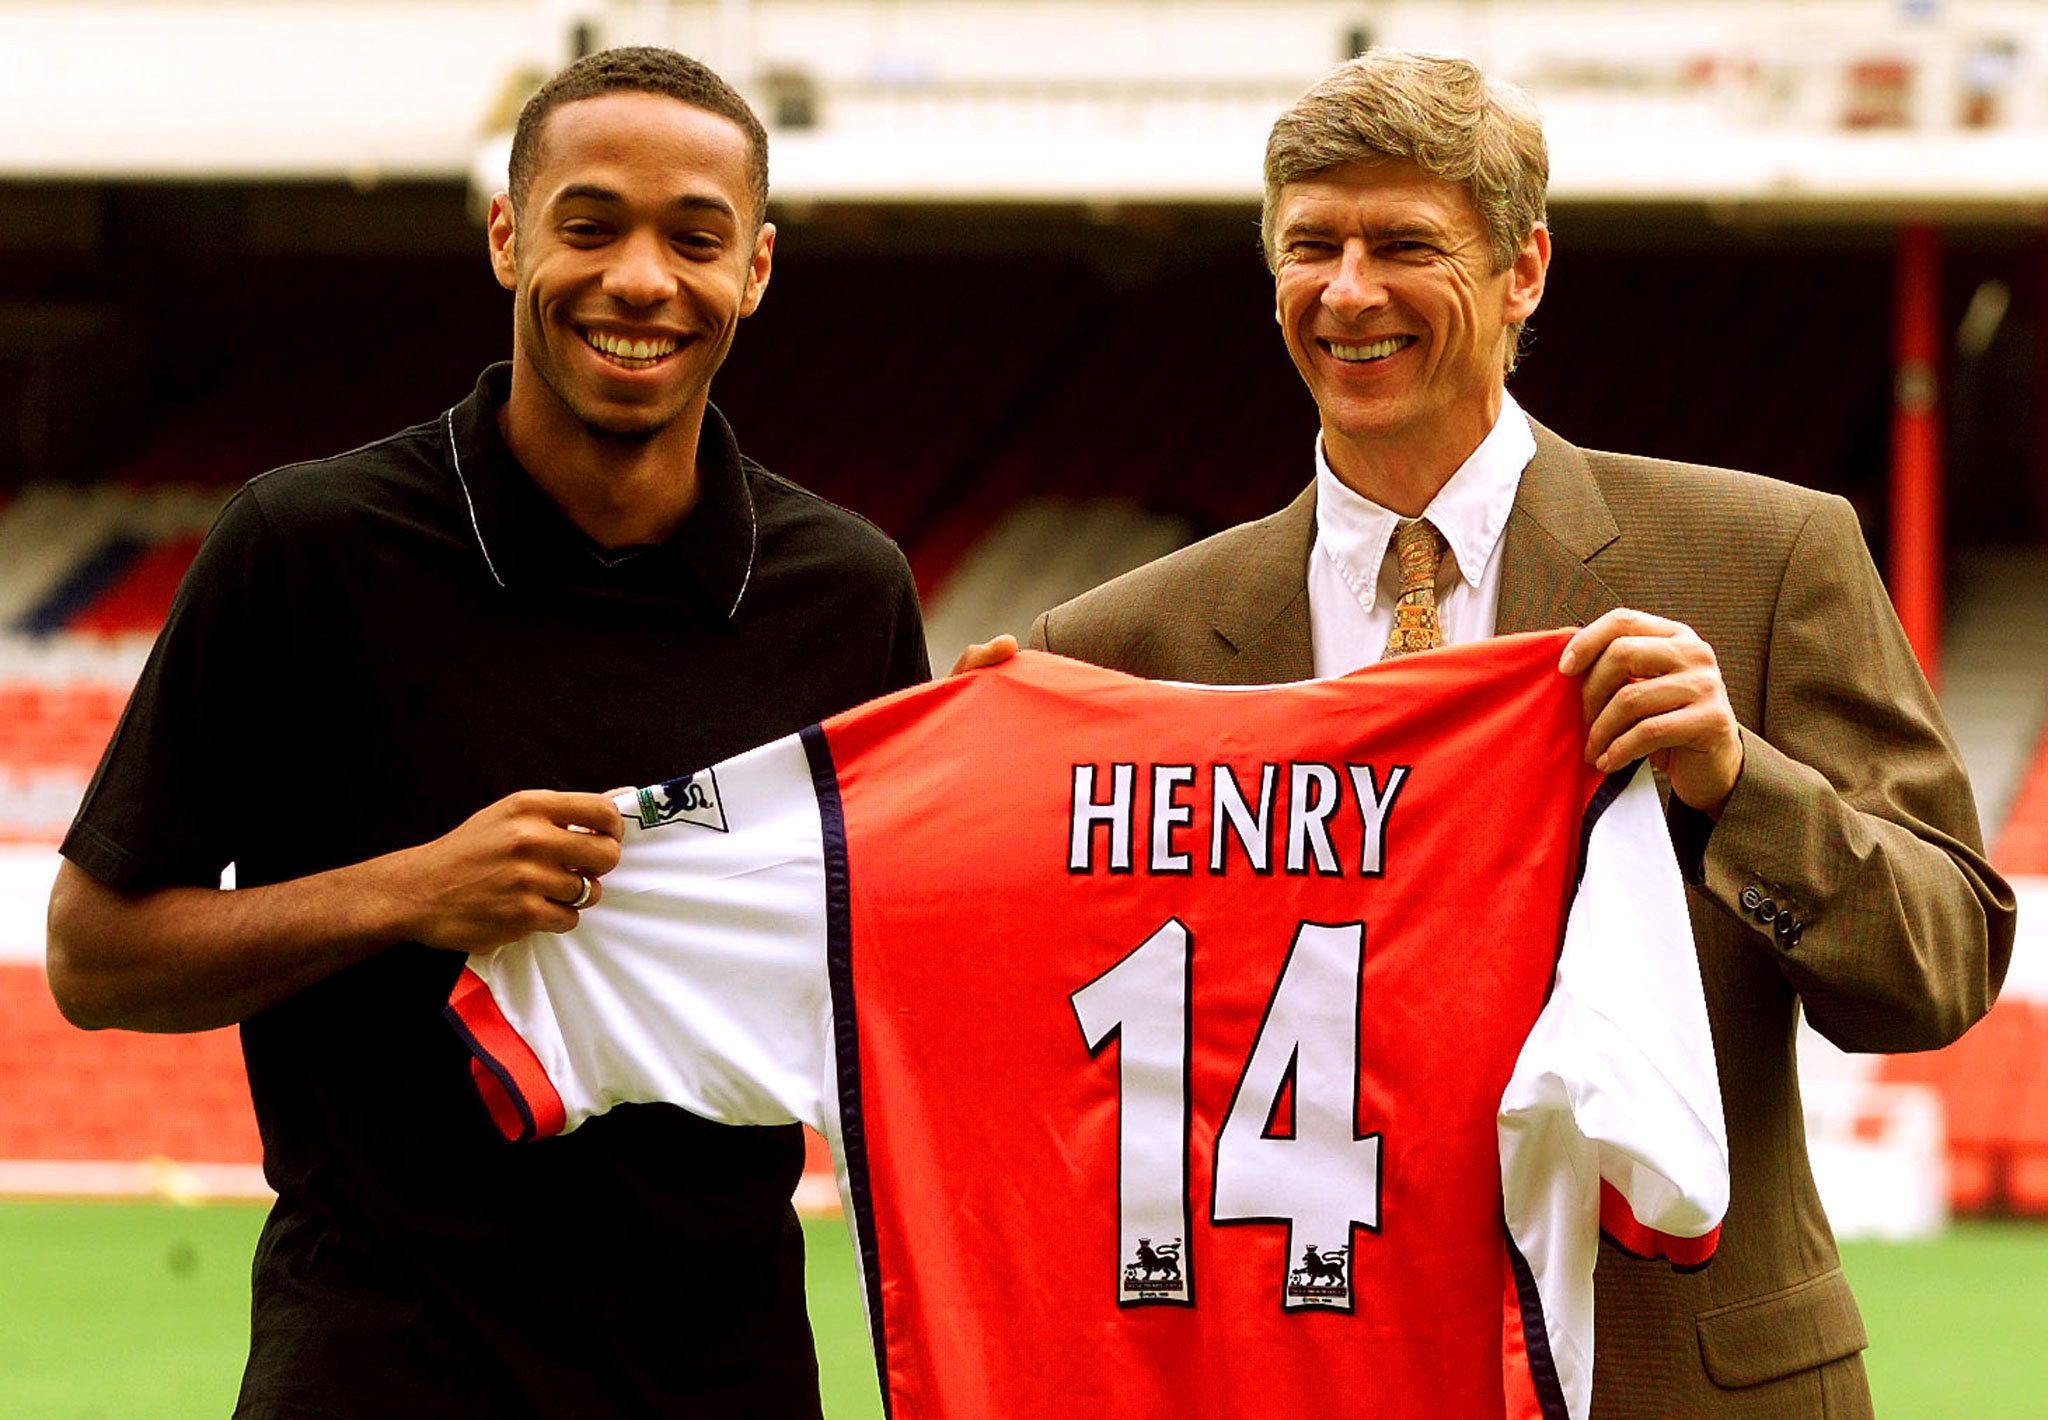 FILE PHOTO: Soccer Football - French international striker Thierry Henry smiles with manager Arsene Wenger as they show off his new number 14 Arsenal shirt at Highbury, London, Britain - August 3, 1999 REUTERS/Dylan Martinez/File Photo